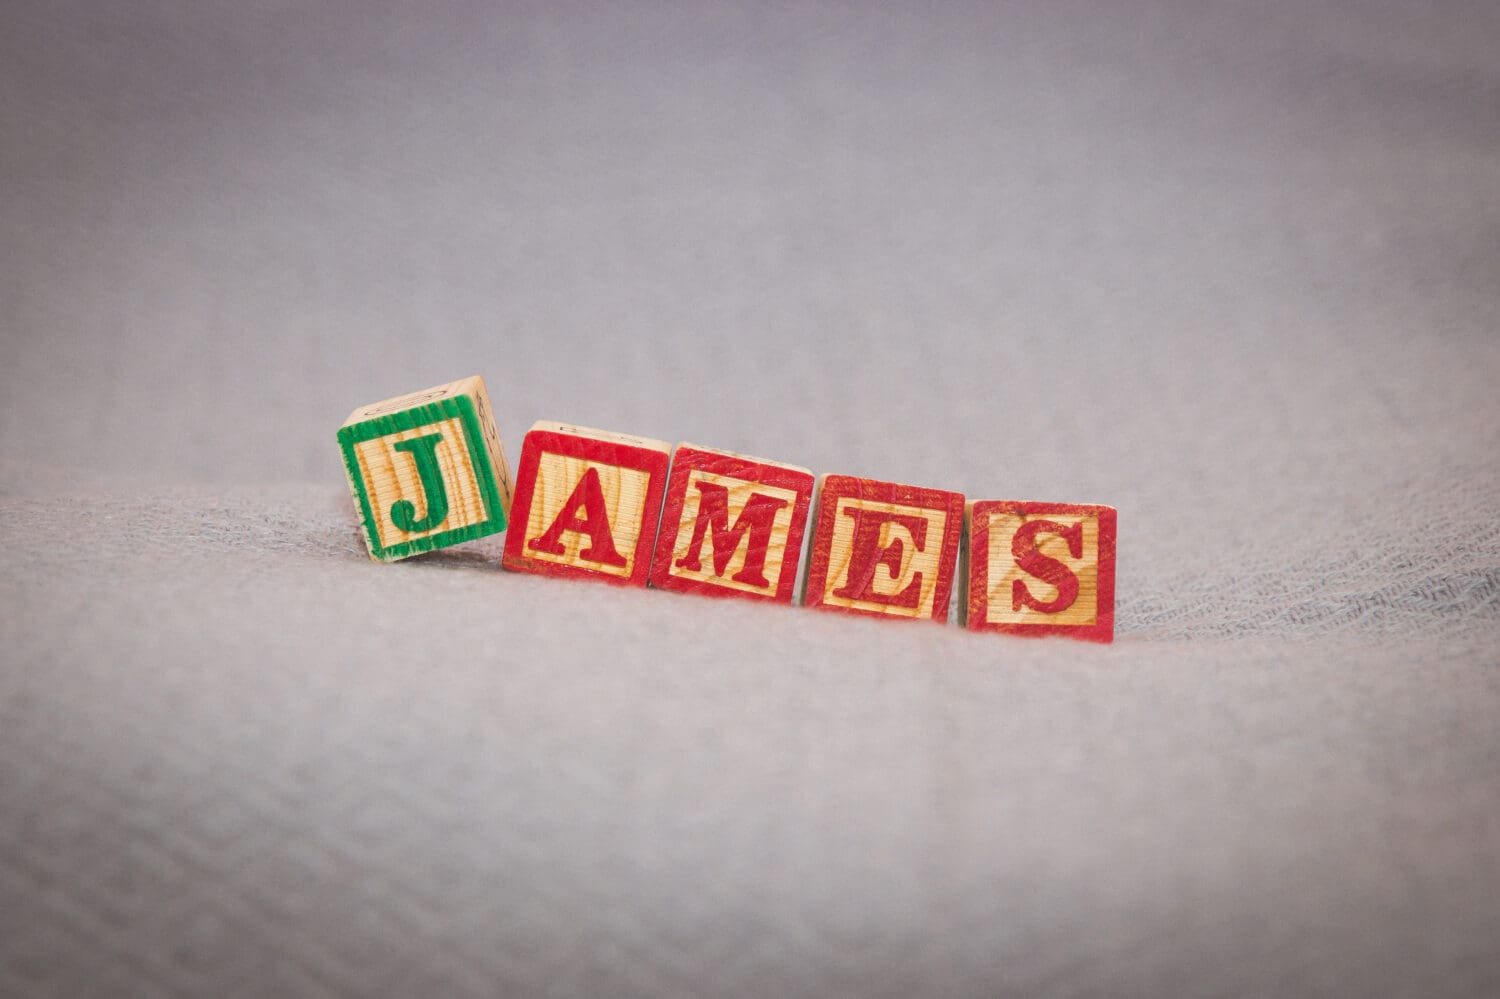 Boy's baby name James in wooden toy blocks in red and green on blanket closeup